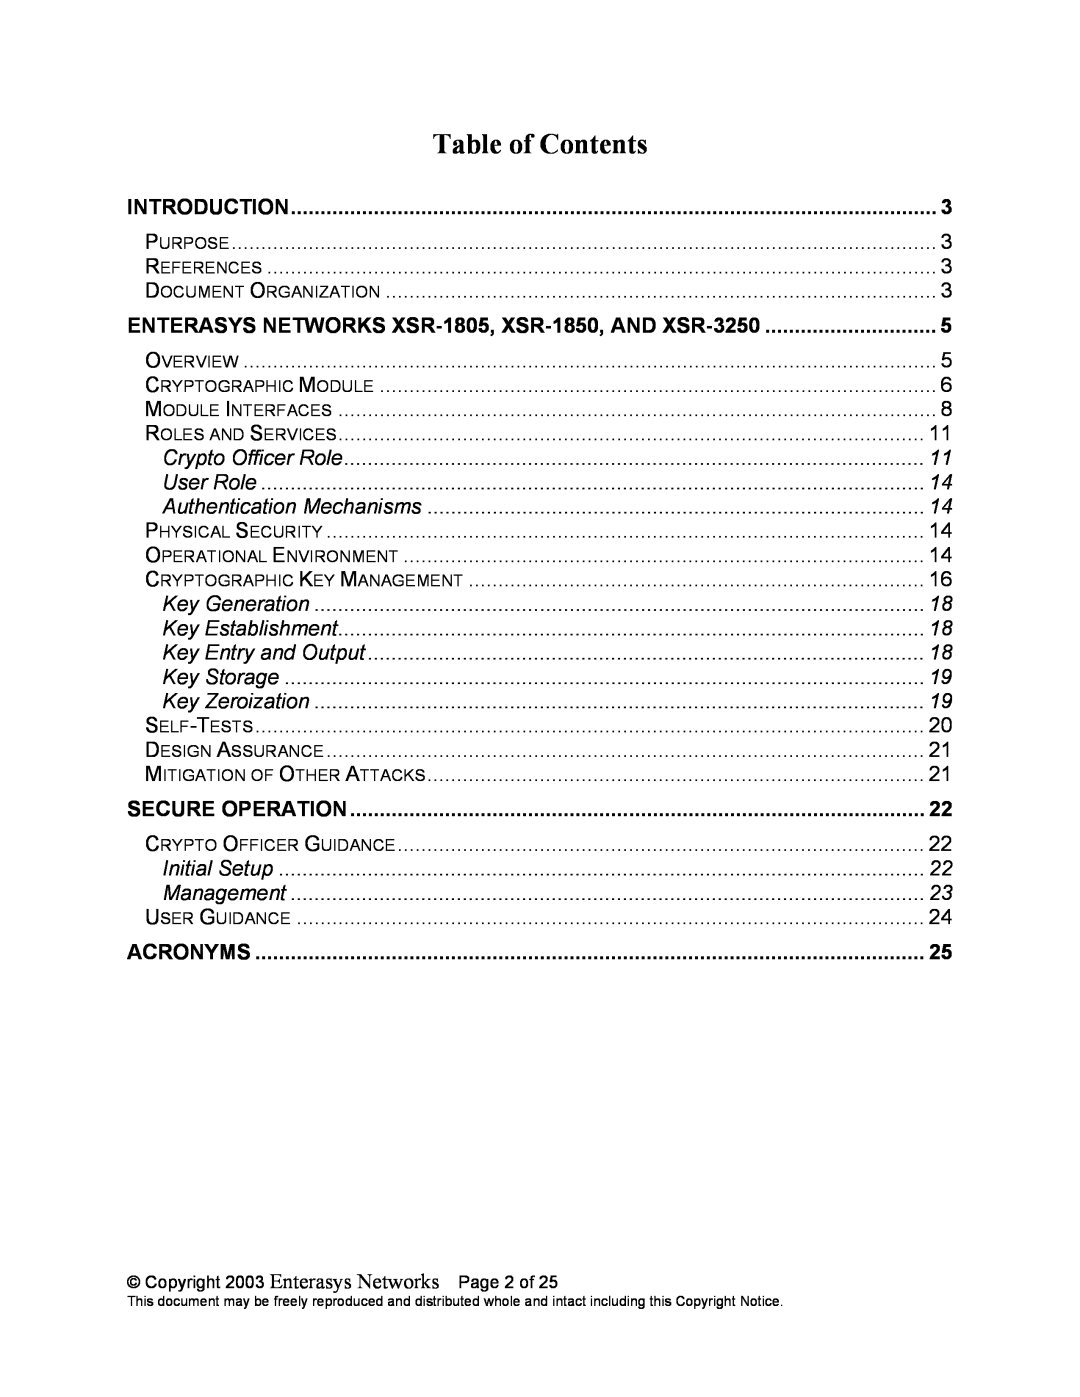 Enterasys Networks manual Table of Contents, Introduction, ENTERASYS NETWORKS XSR-1805, XSR-1850, AND XSR-3250, Acronyms 